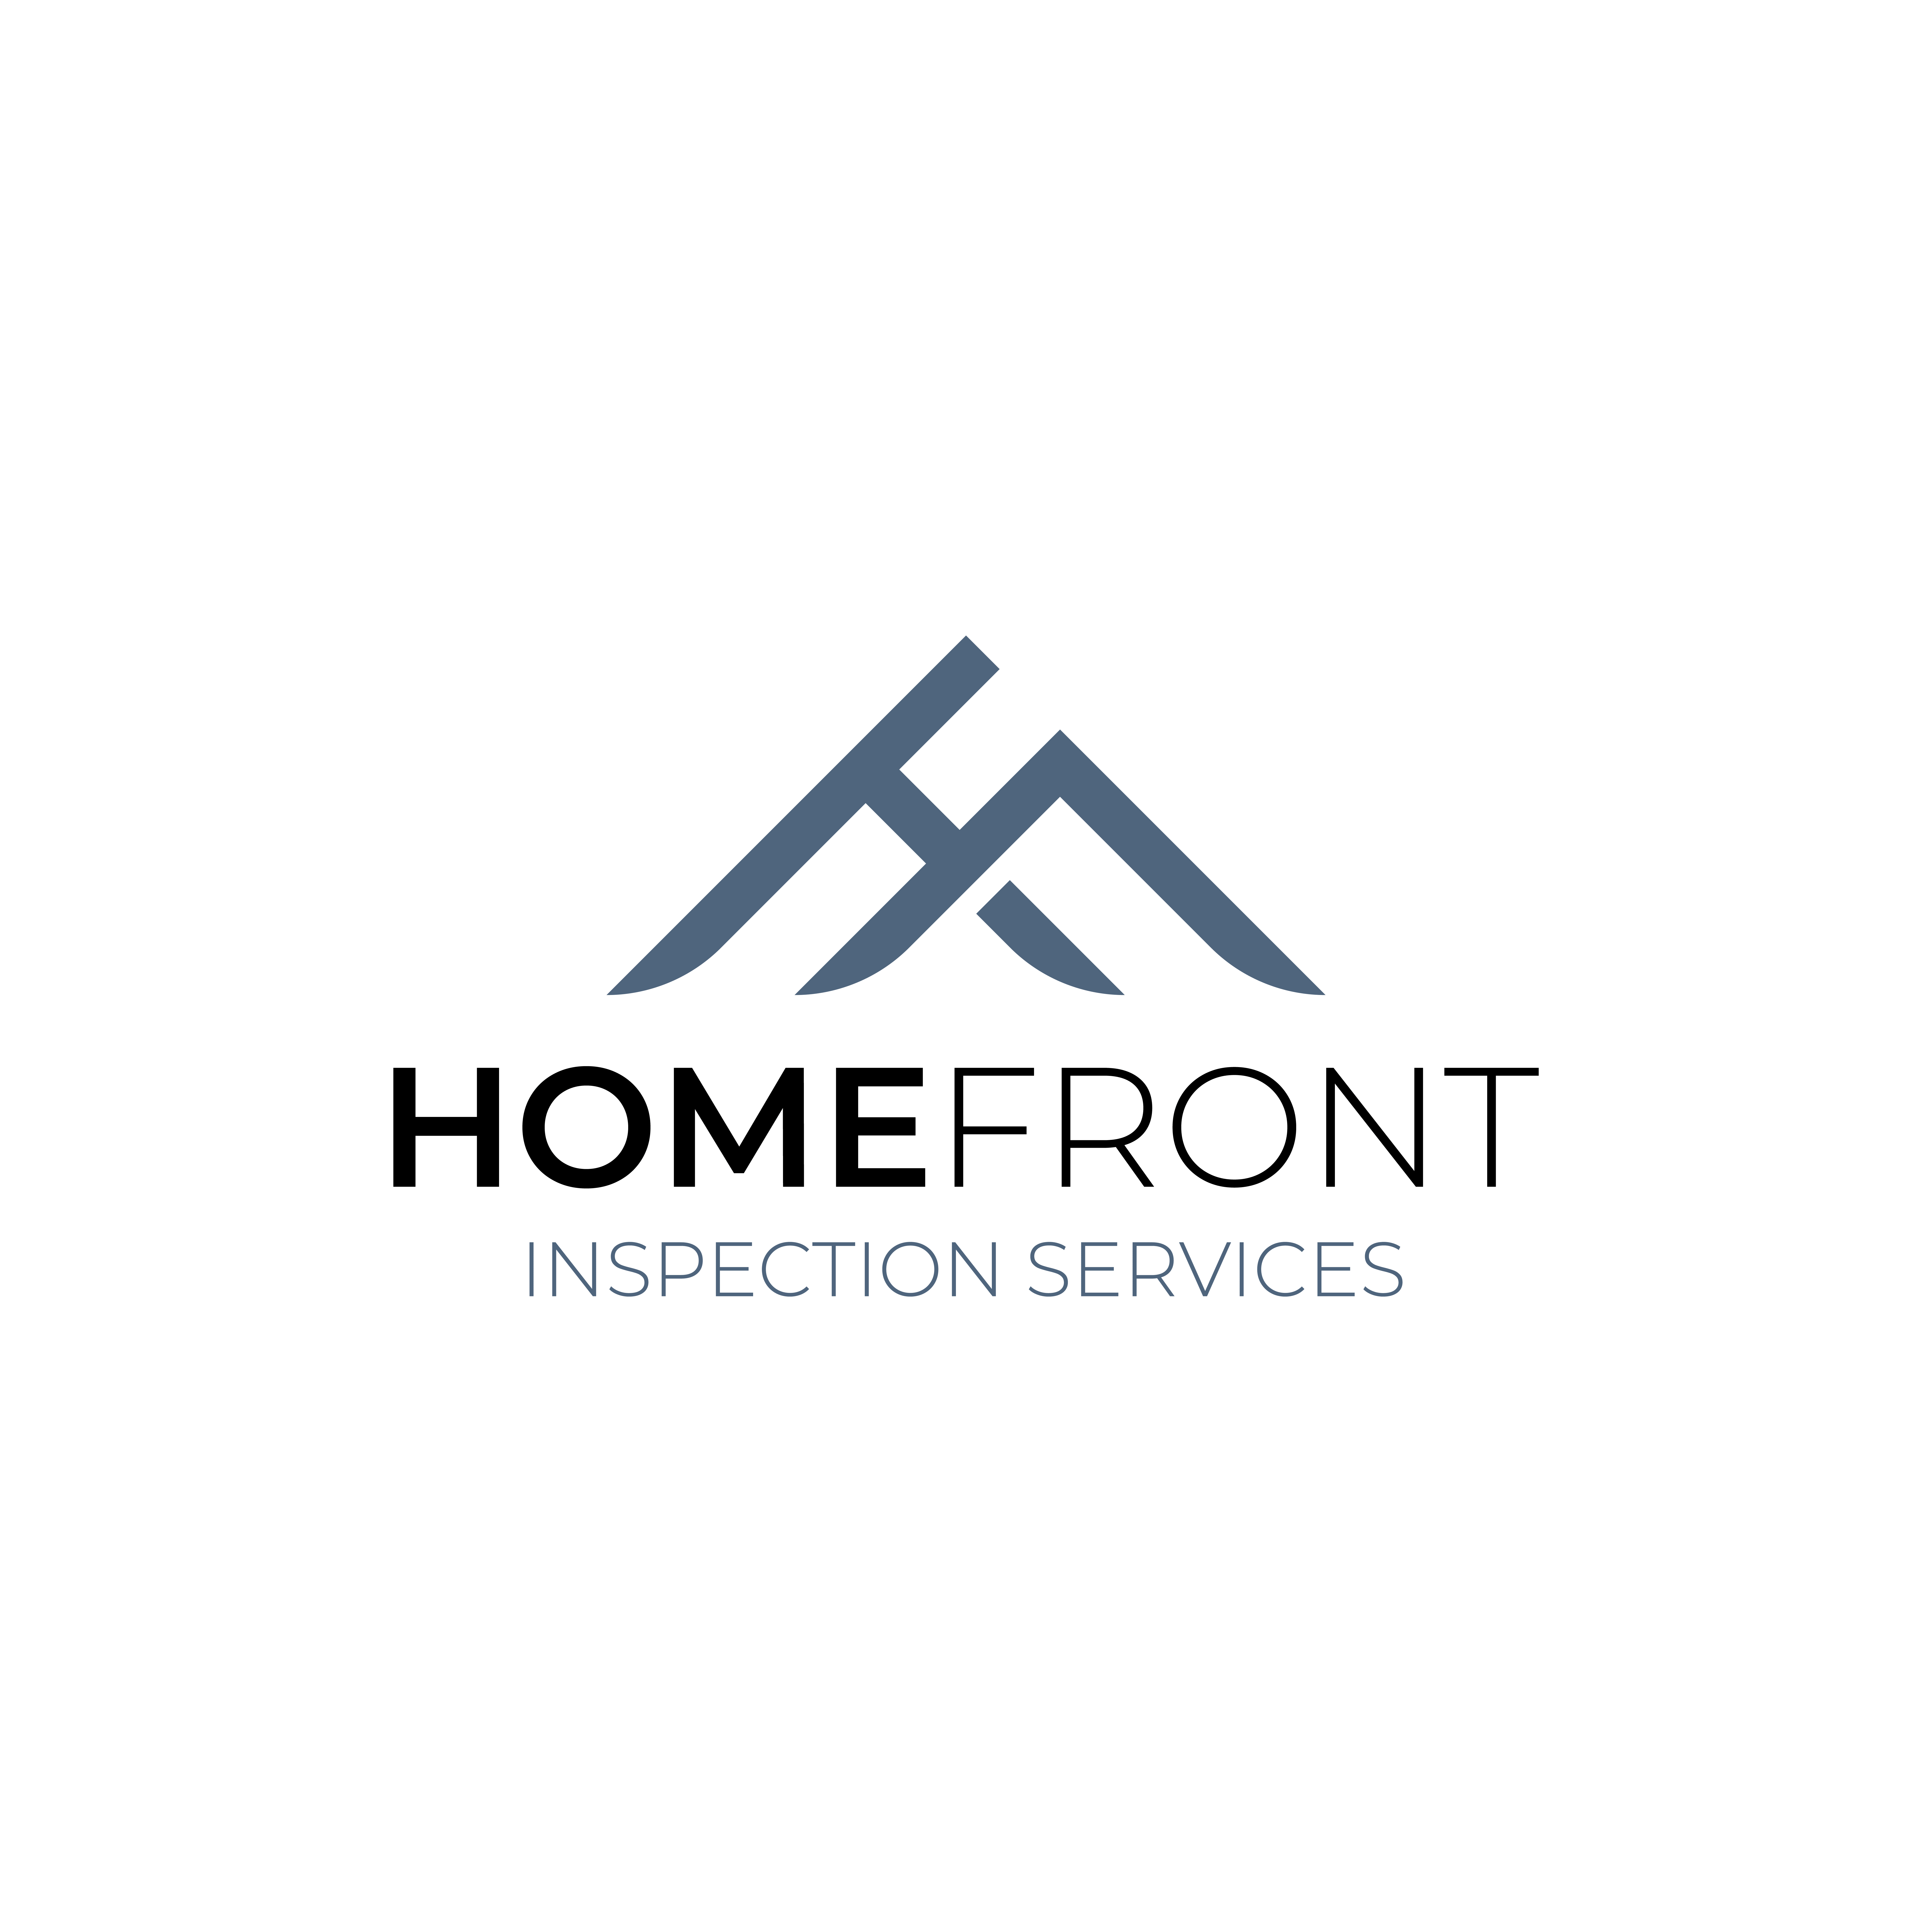 Home-Front Inspection Services LLC Logo